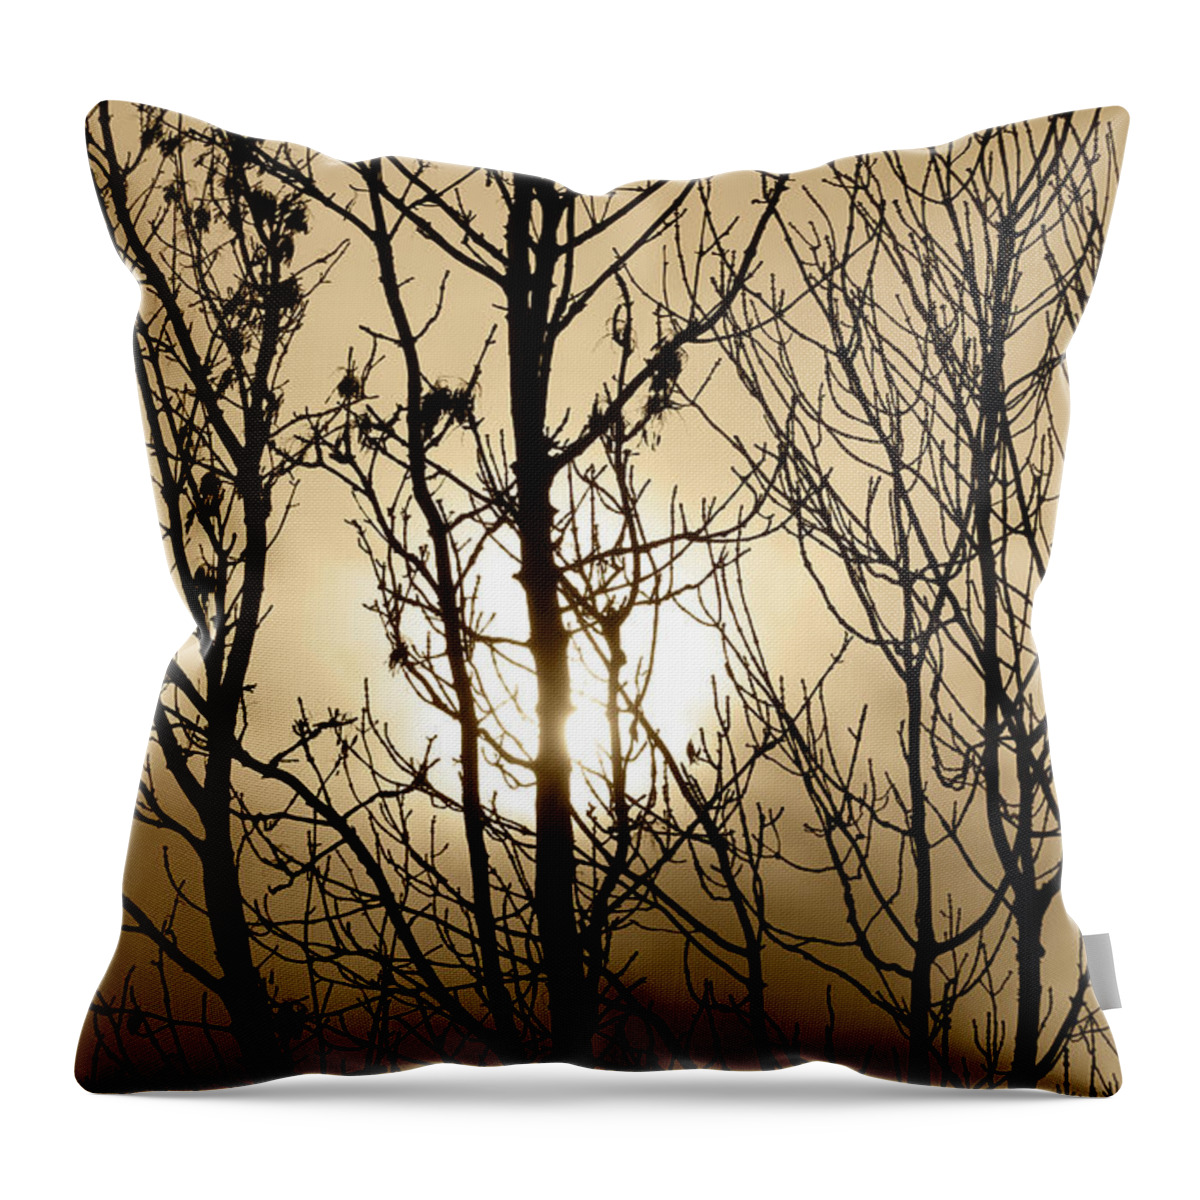 Into The Light Throw Pillow featuring the photograph Winter's Bone Inch Island Donegal Tint 2 by Eddie Barron